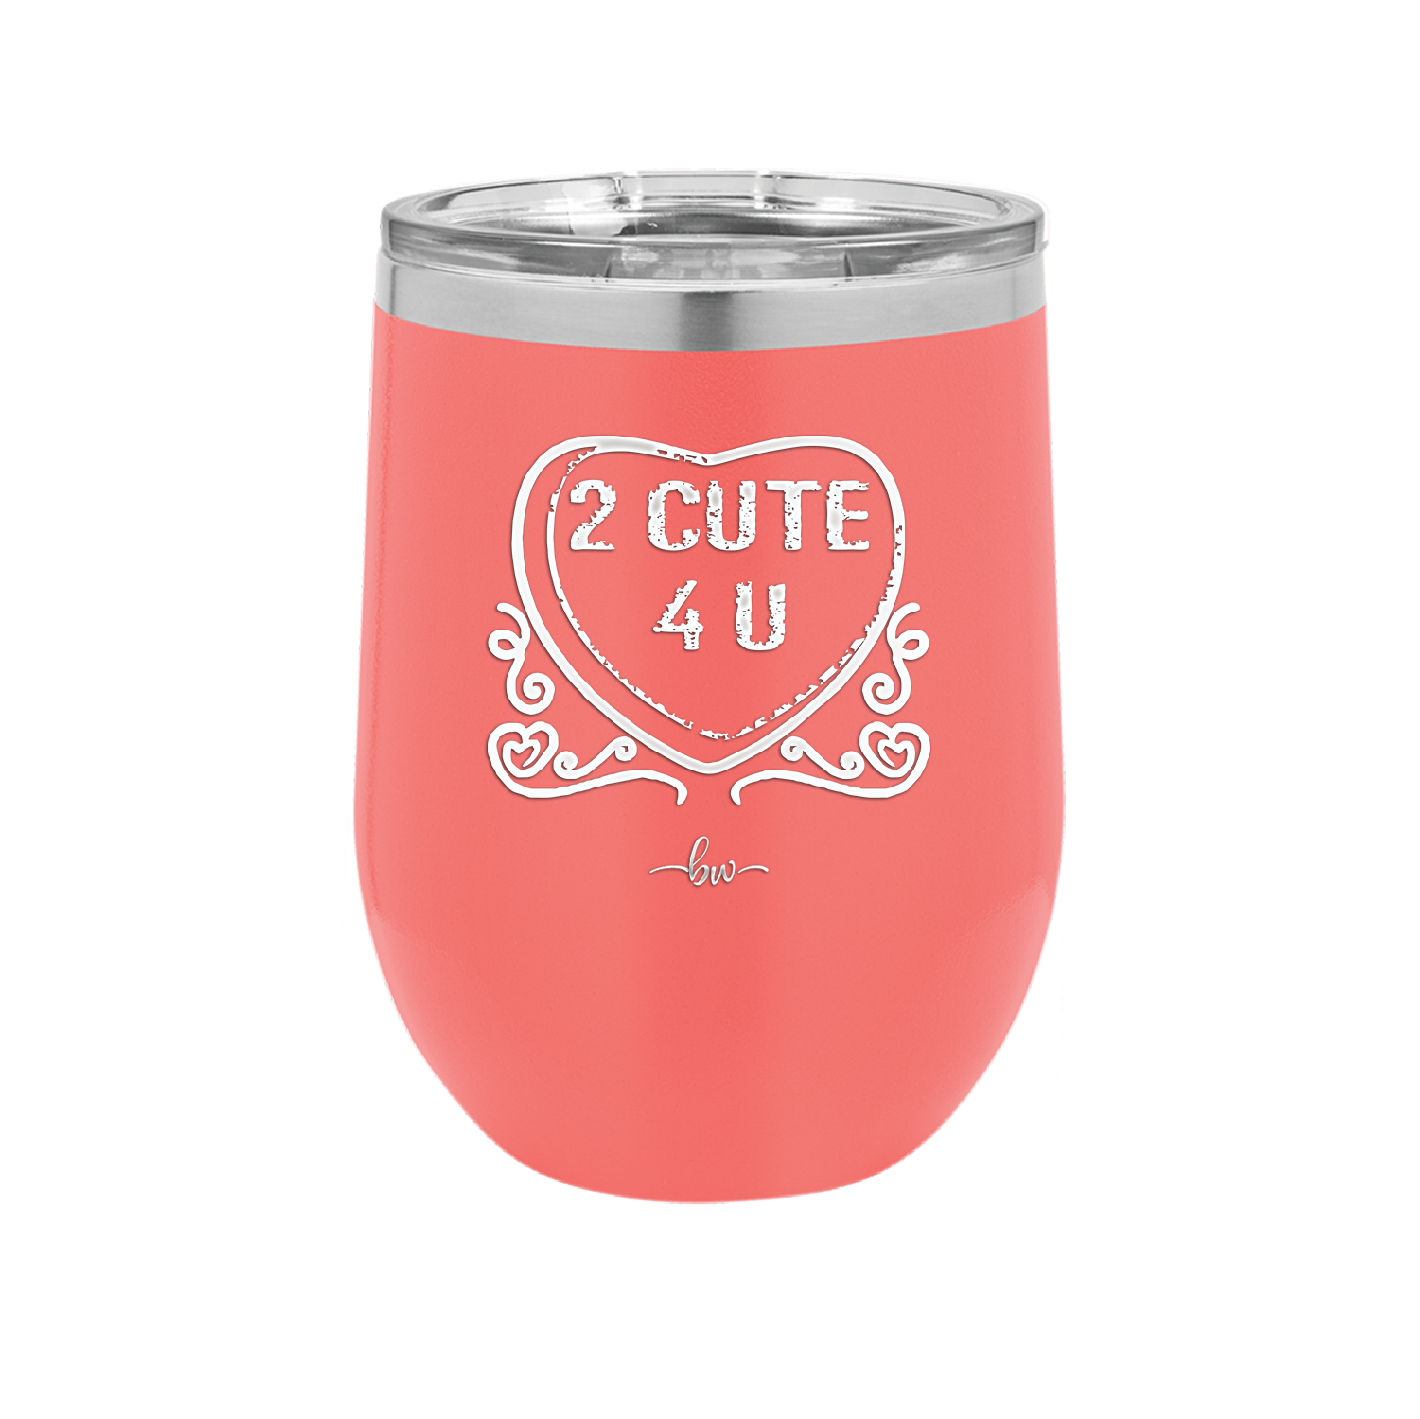 Candy Heart 2 Cute 4 You - Laser Engraved Stainless Steel Drinkware - 1768 -